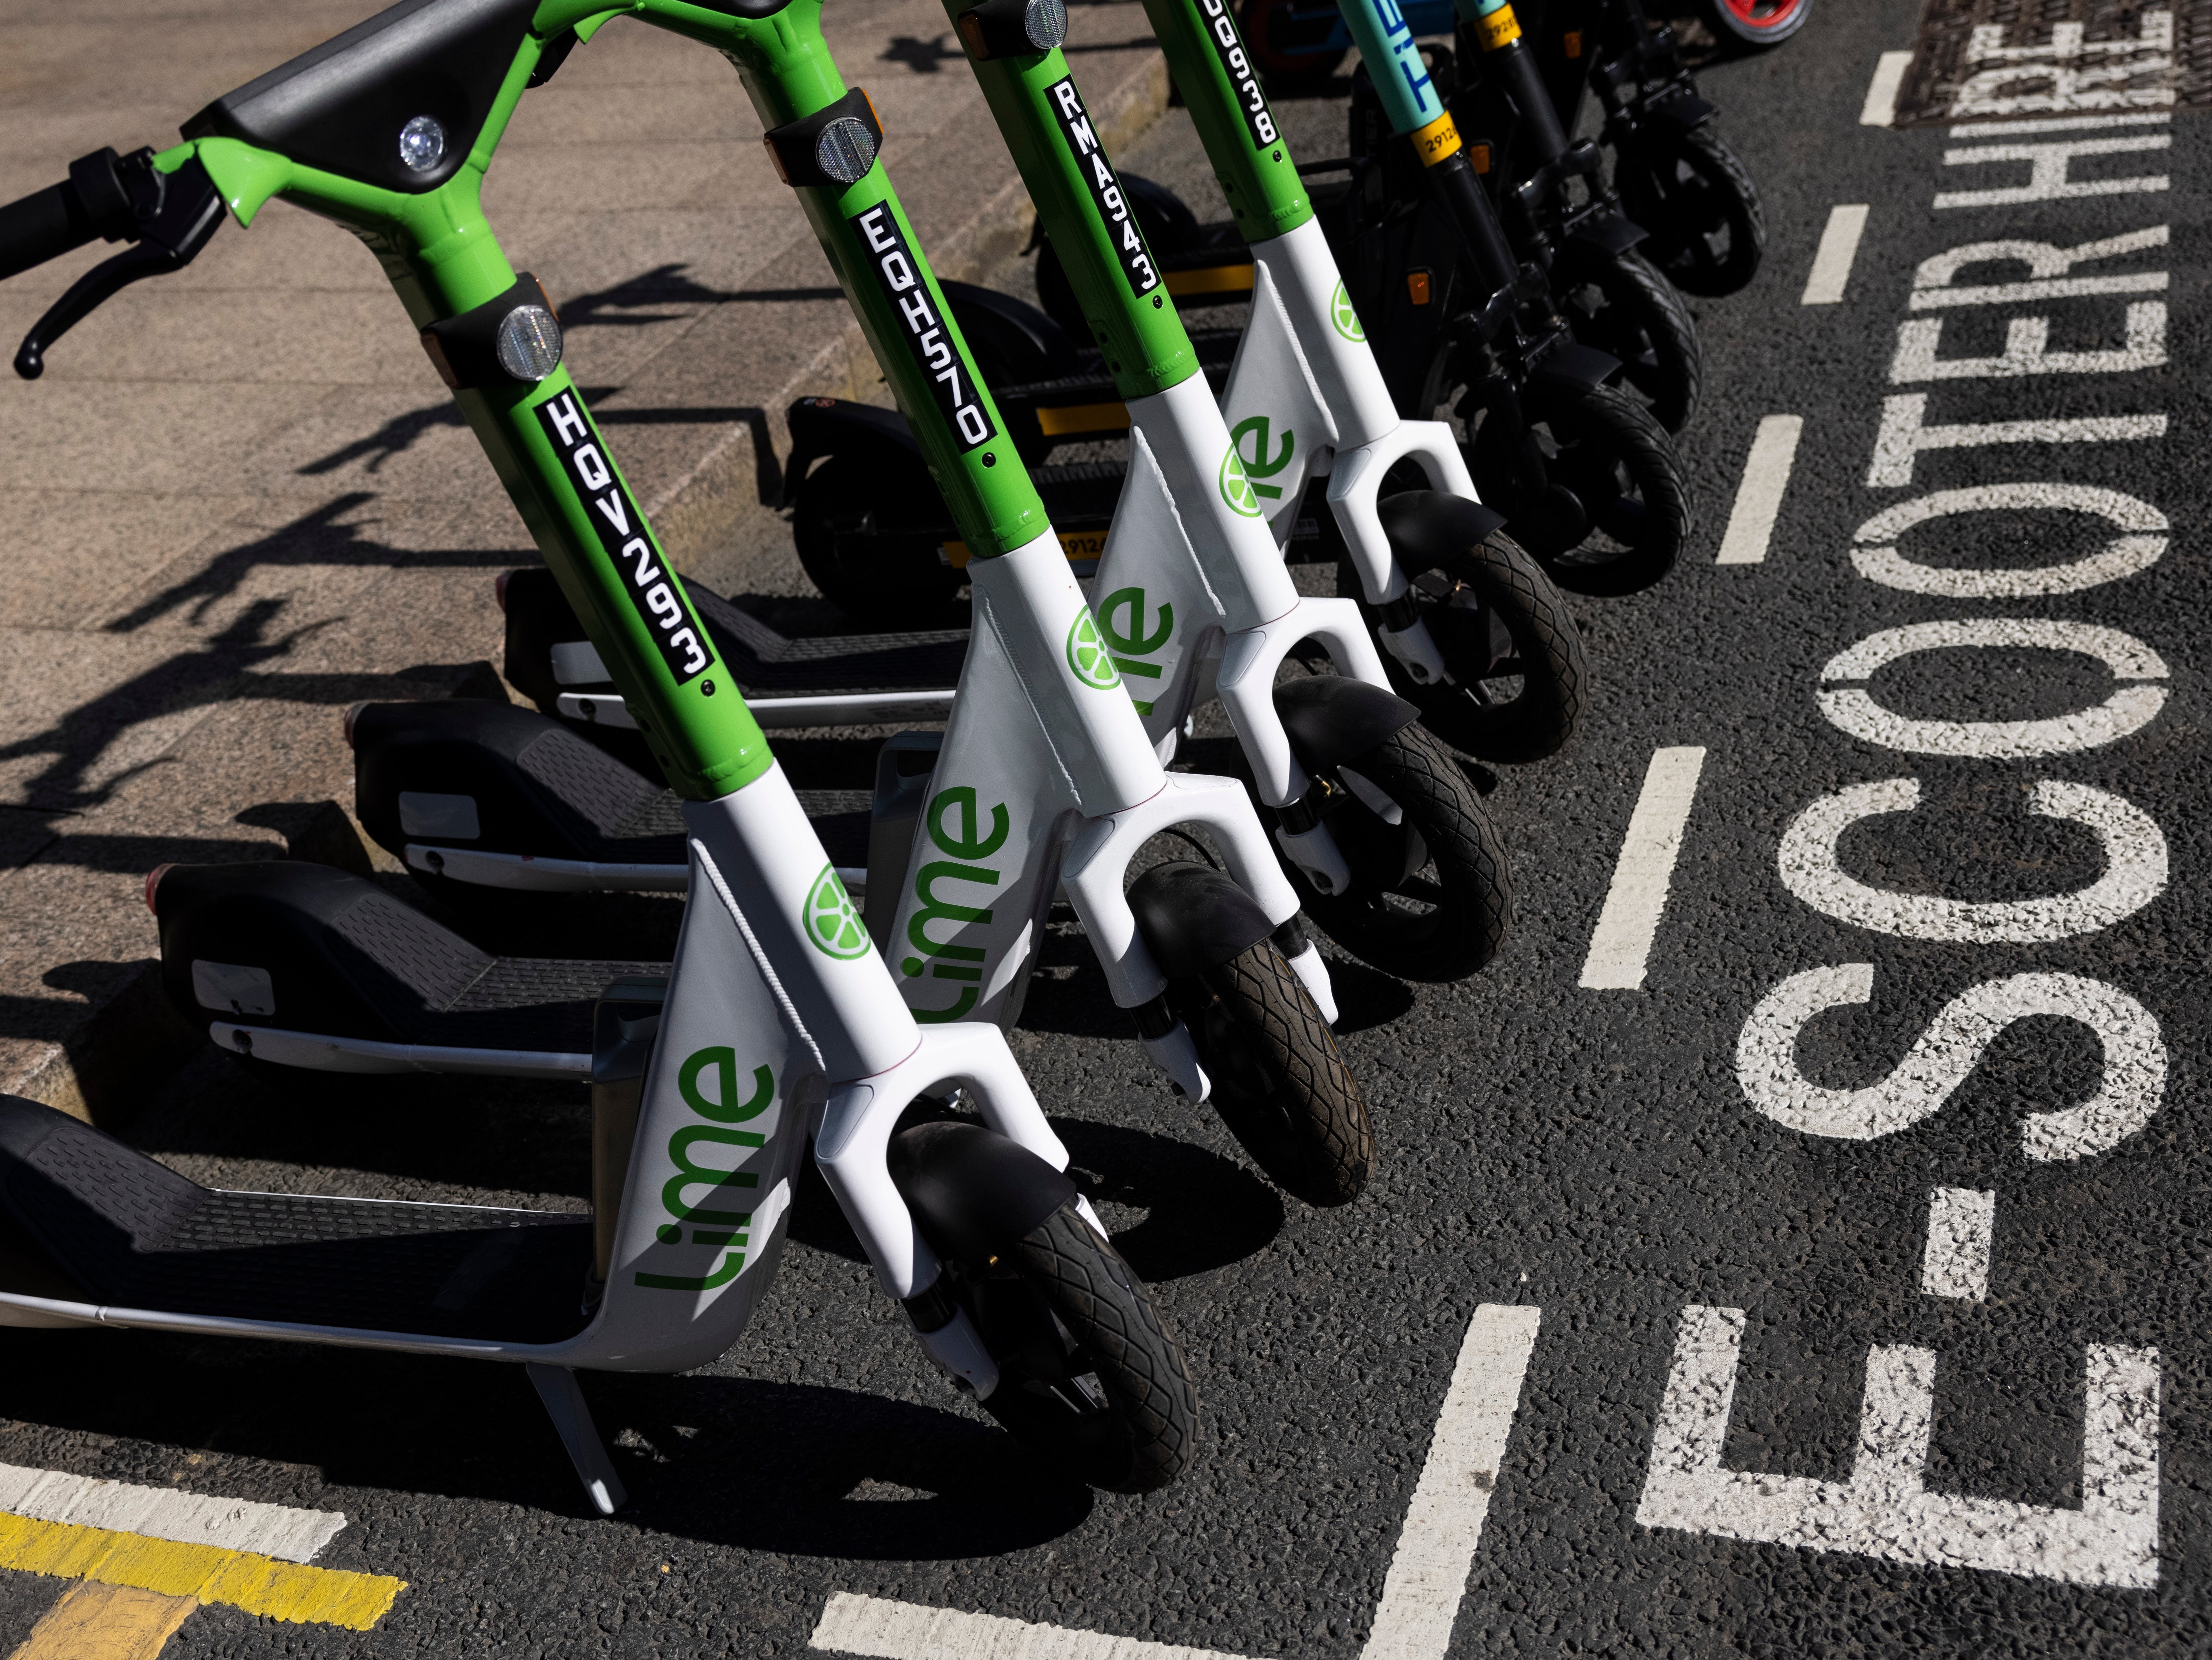 E-scooter pilot programme launches in London